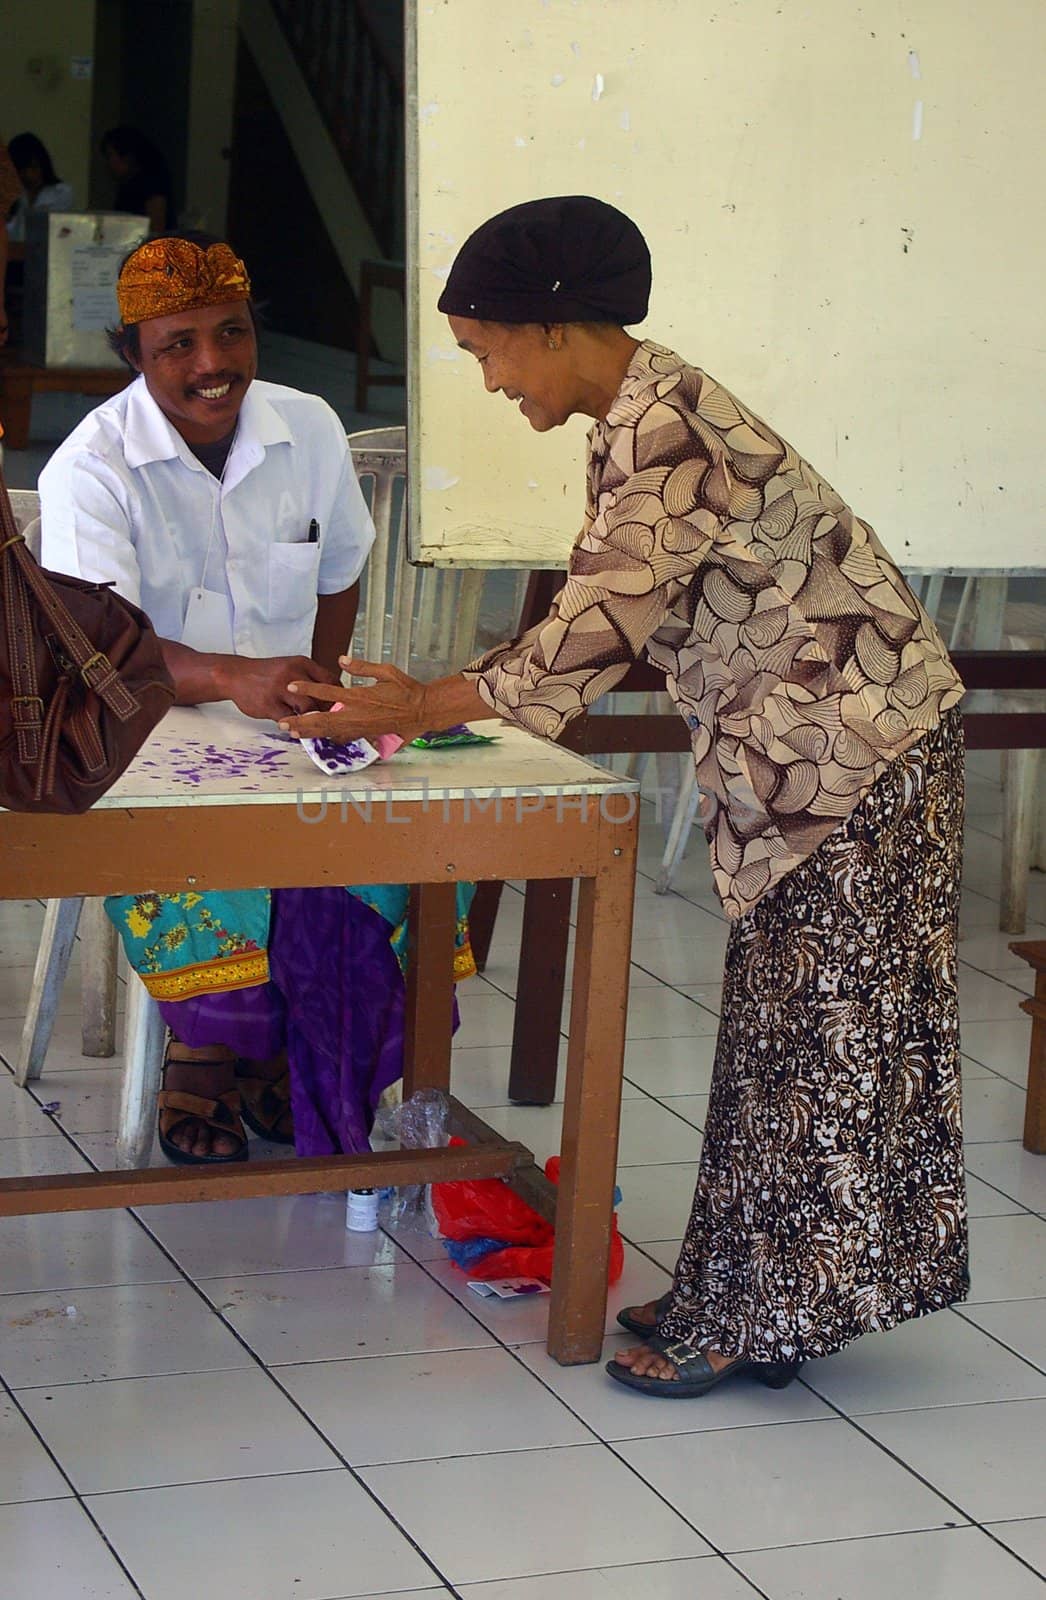 A woman applying ink to her finger as a mark to show she has already voted in Indonesia's Presidential election. Tuban, Bali, Indonesia. July 8, 2009.